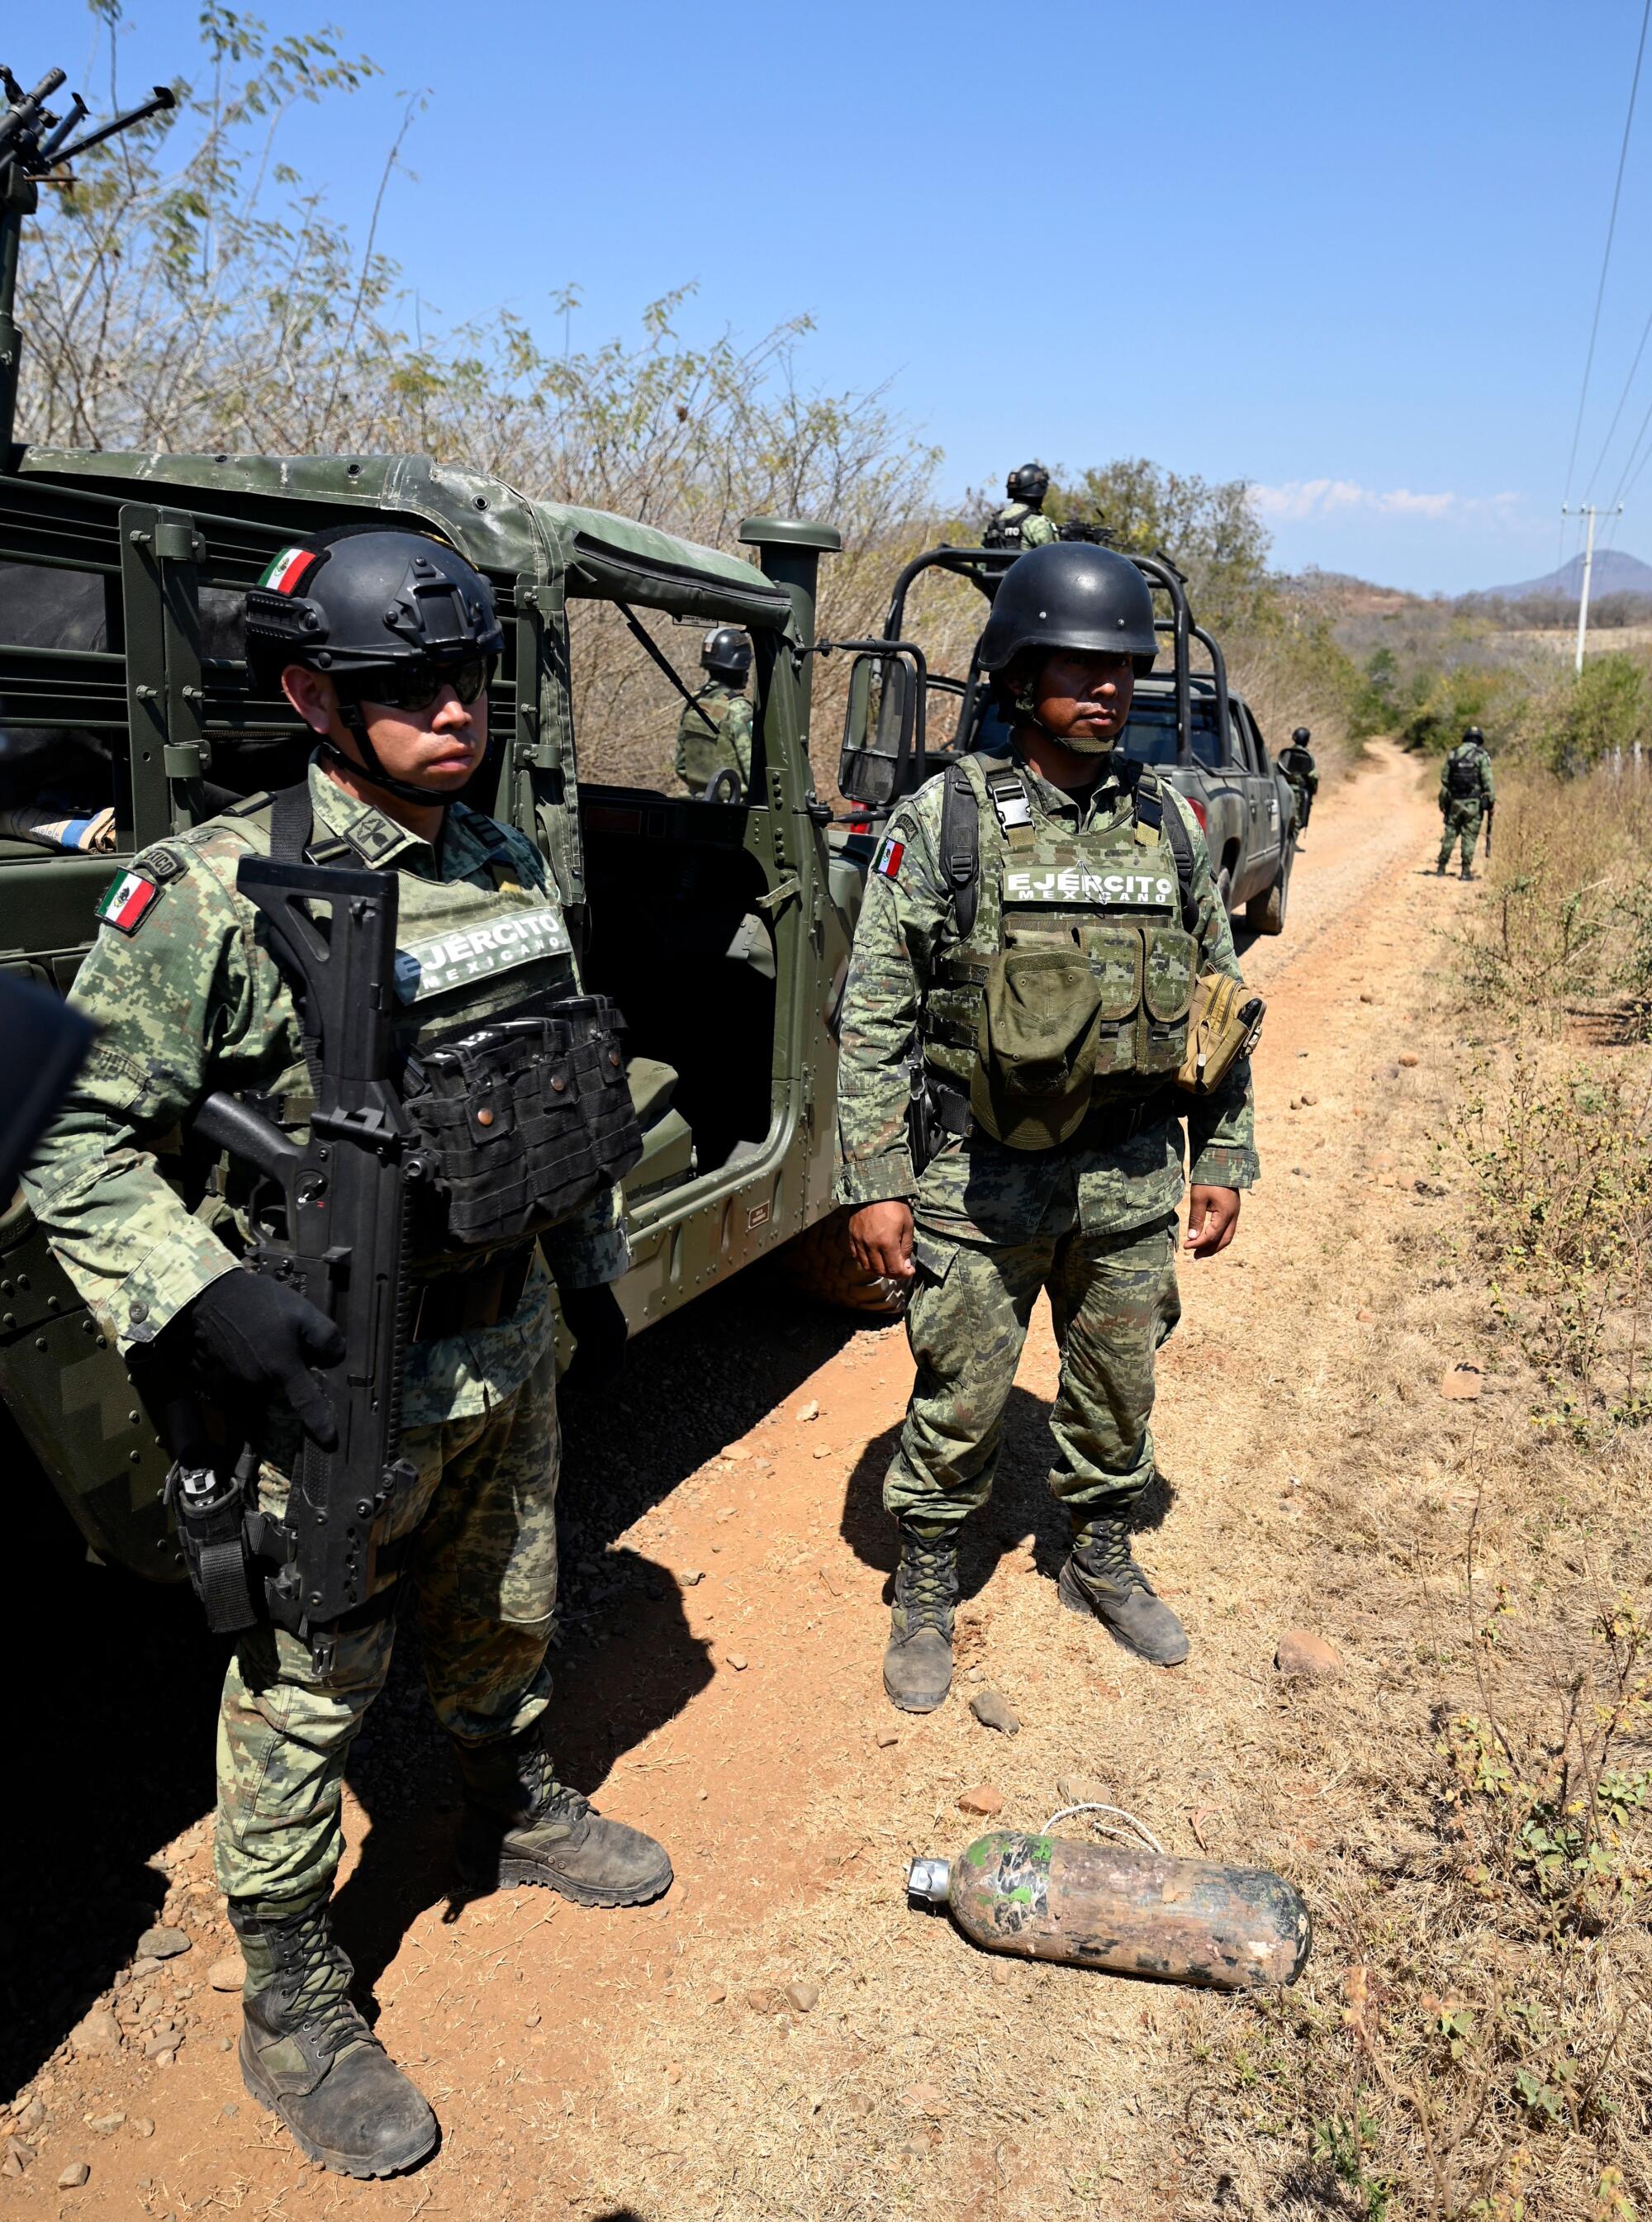 Soldiers of the special forces of the Mexican Army show an explosive device used as an 